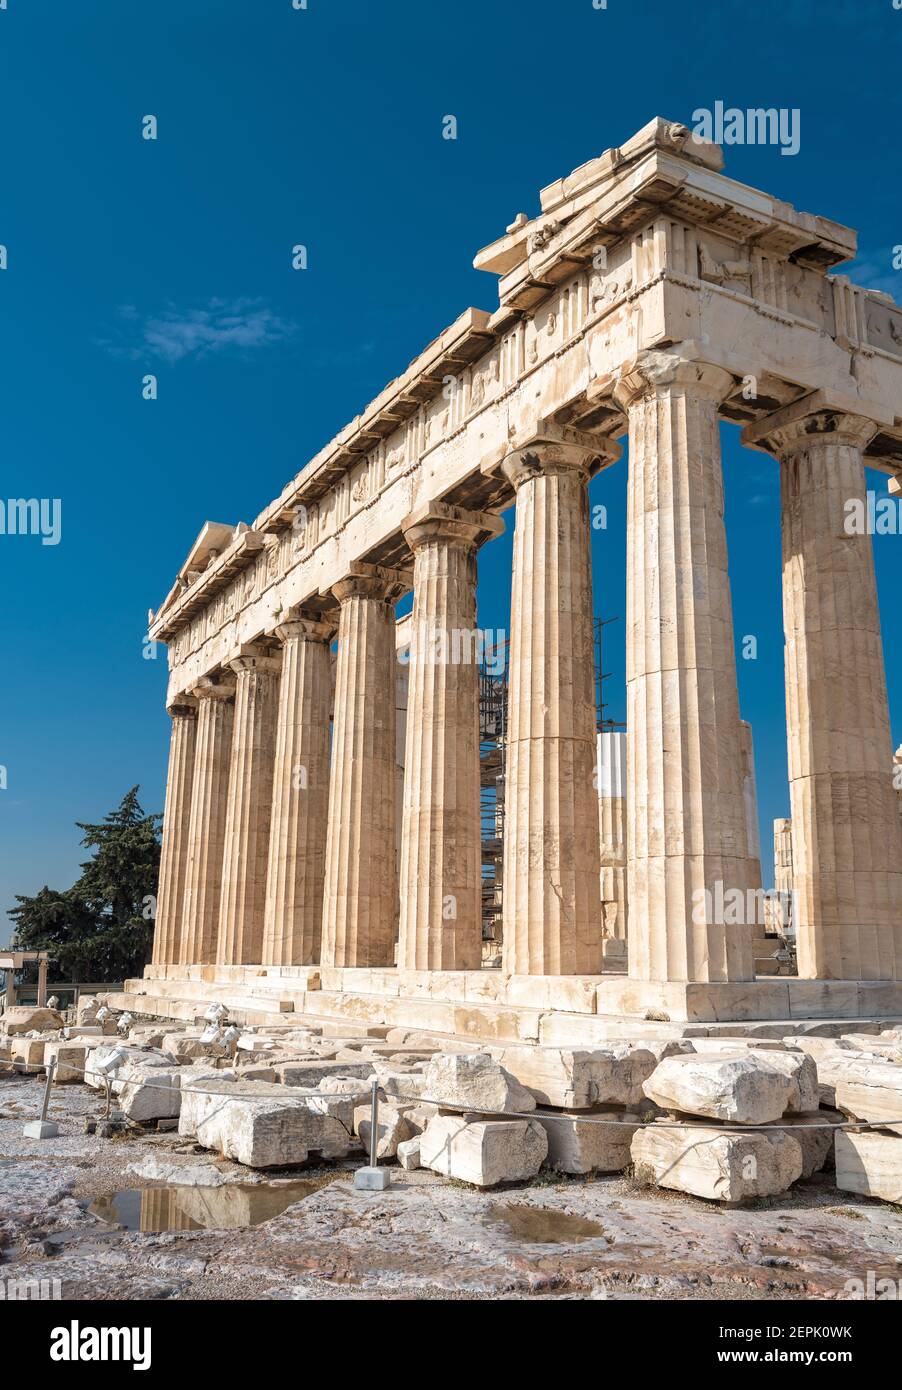 Parthenon temple on Acropolis, Athens, Greece. It is top landmark of Athens. Ruins of famous building on Acropolis hill, Ancient Greek architecture of Stock Photo